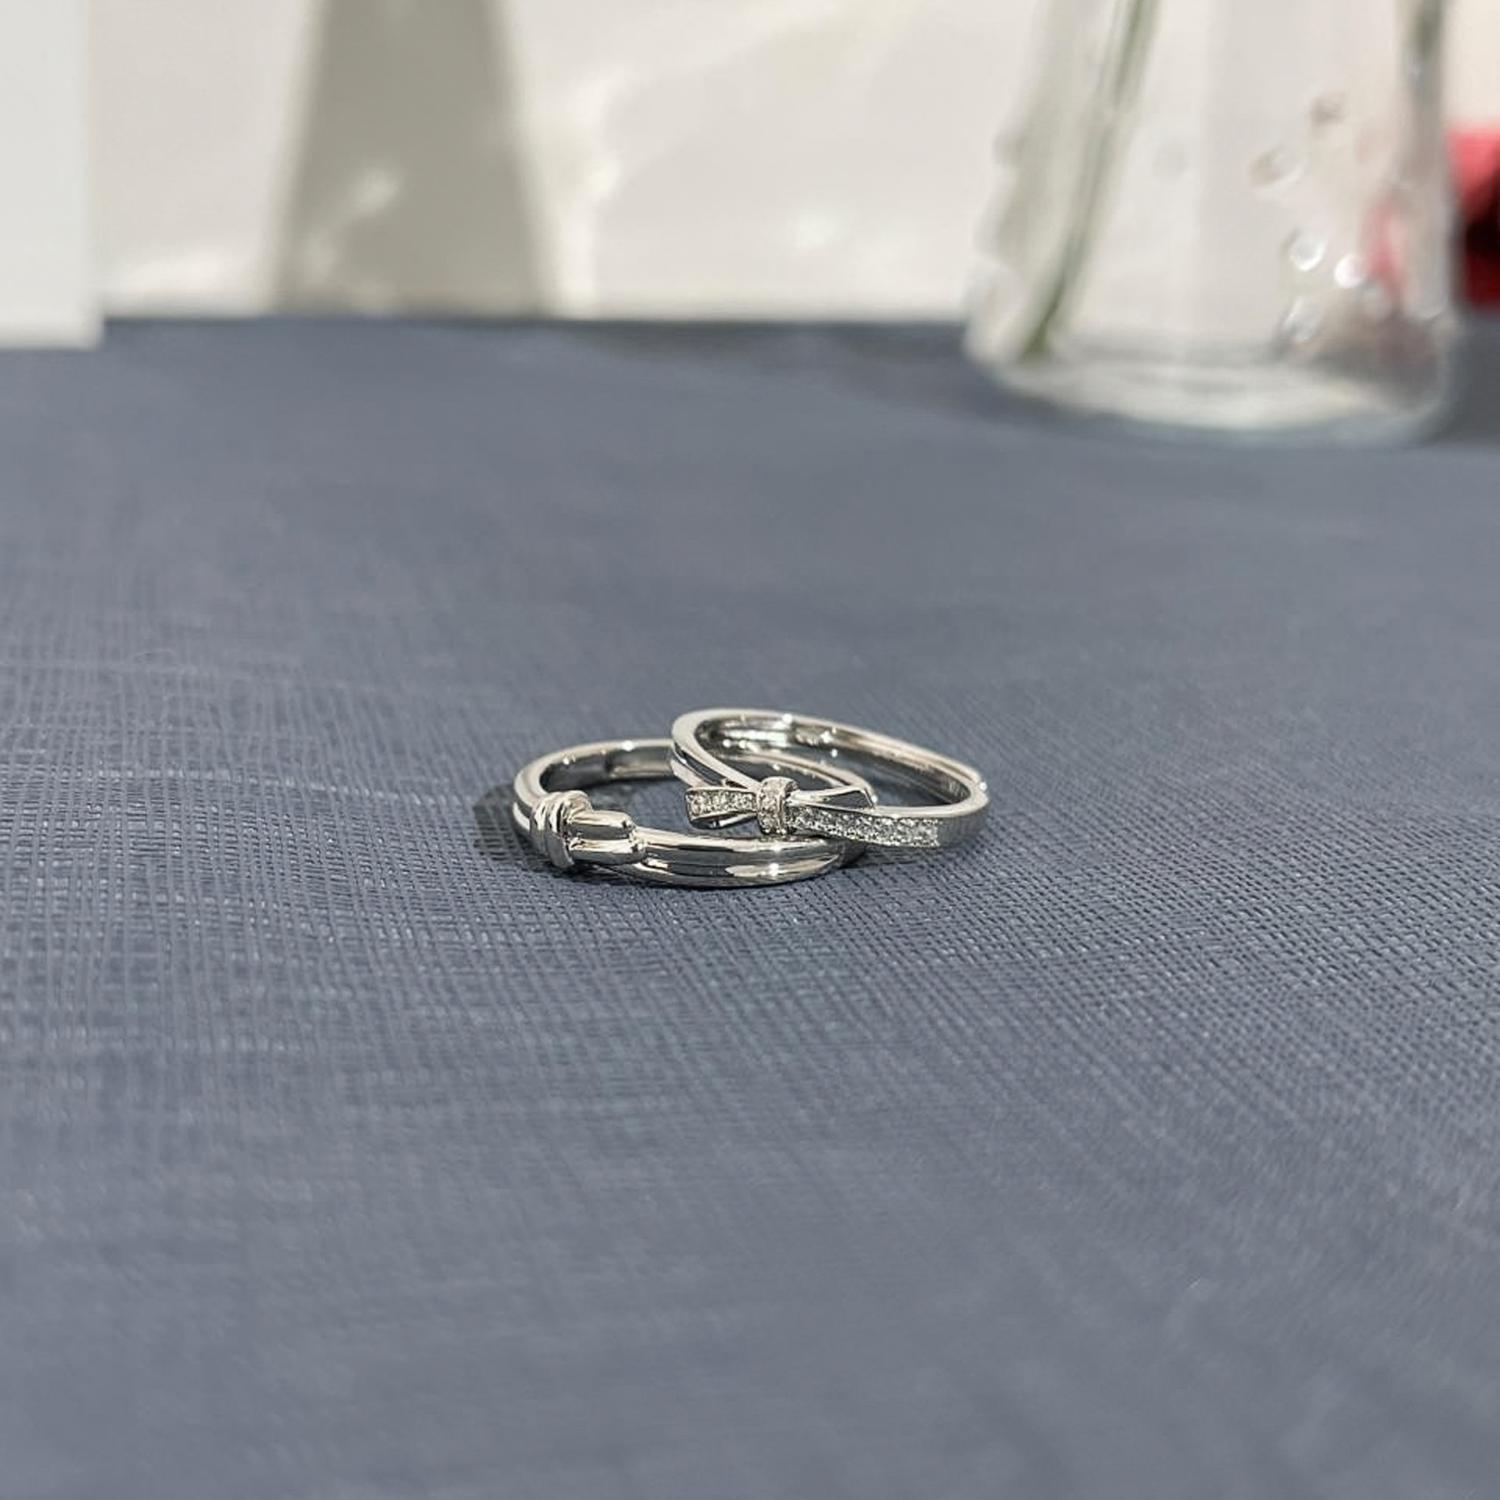 Adjustable Knot Promise Rings Sets In Sterling Silver - CoupleSets